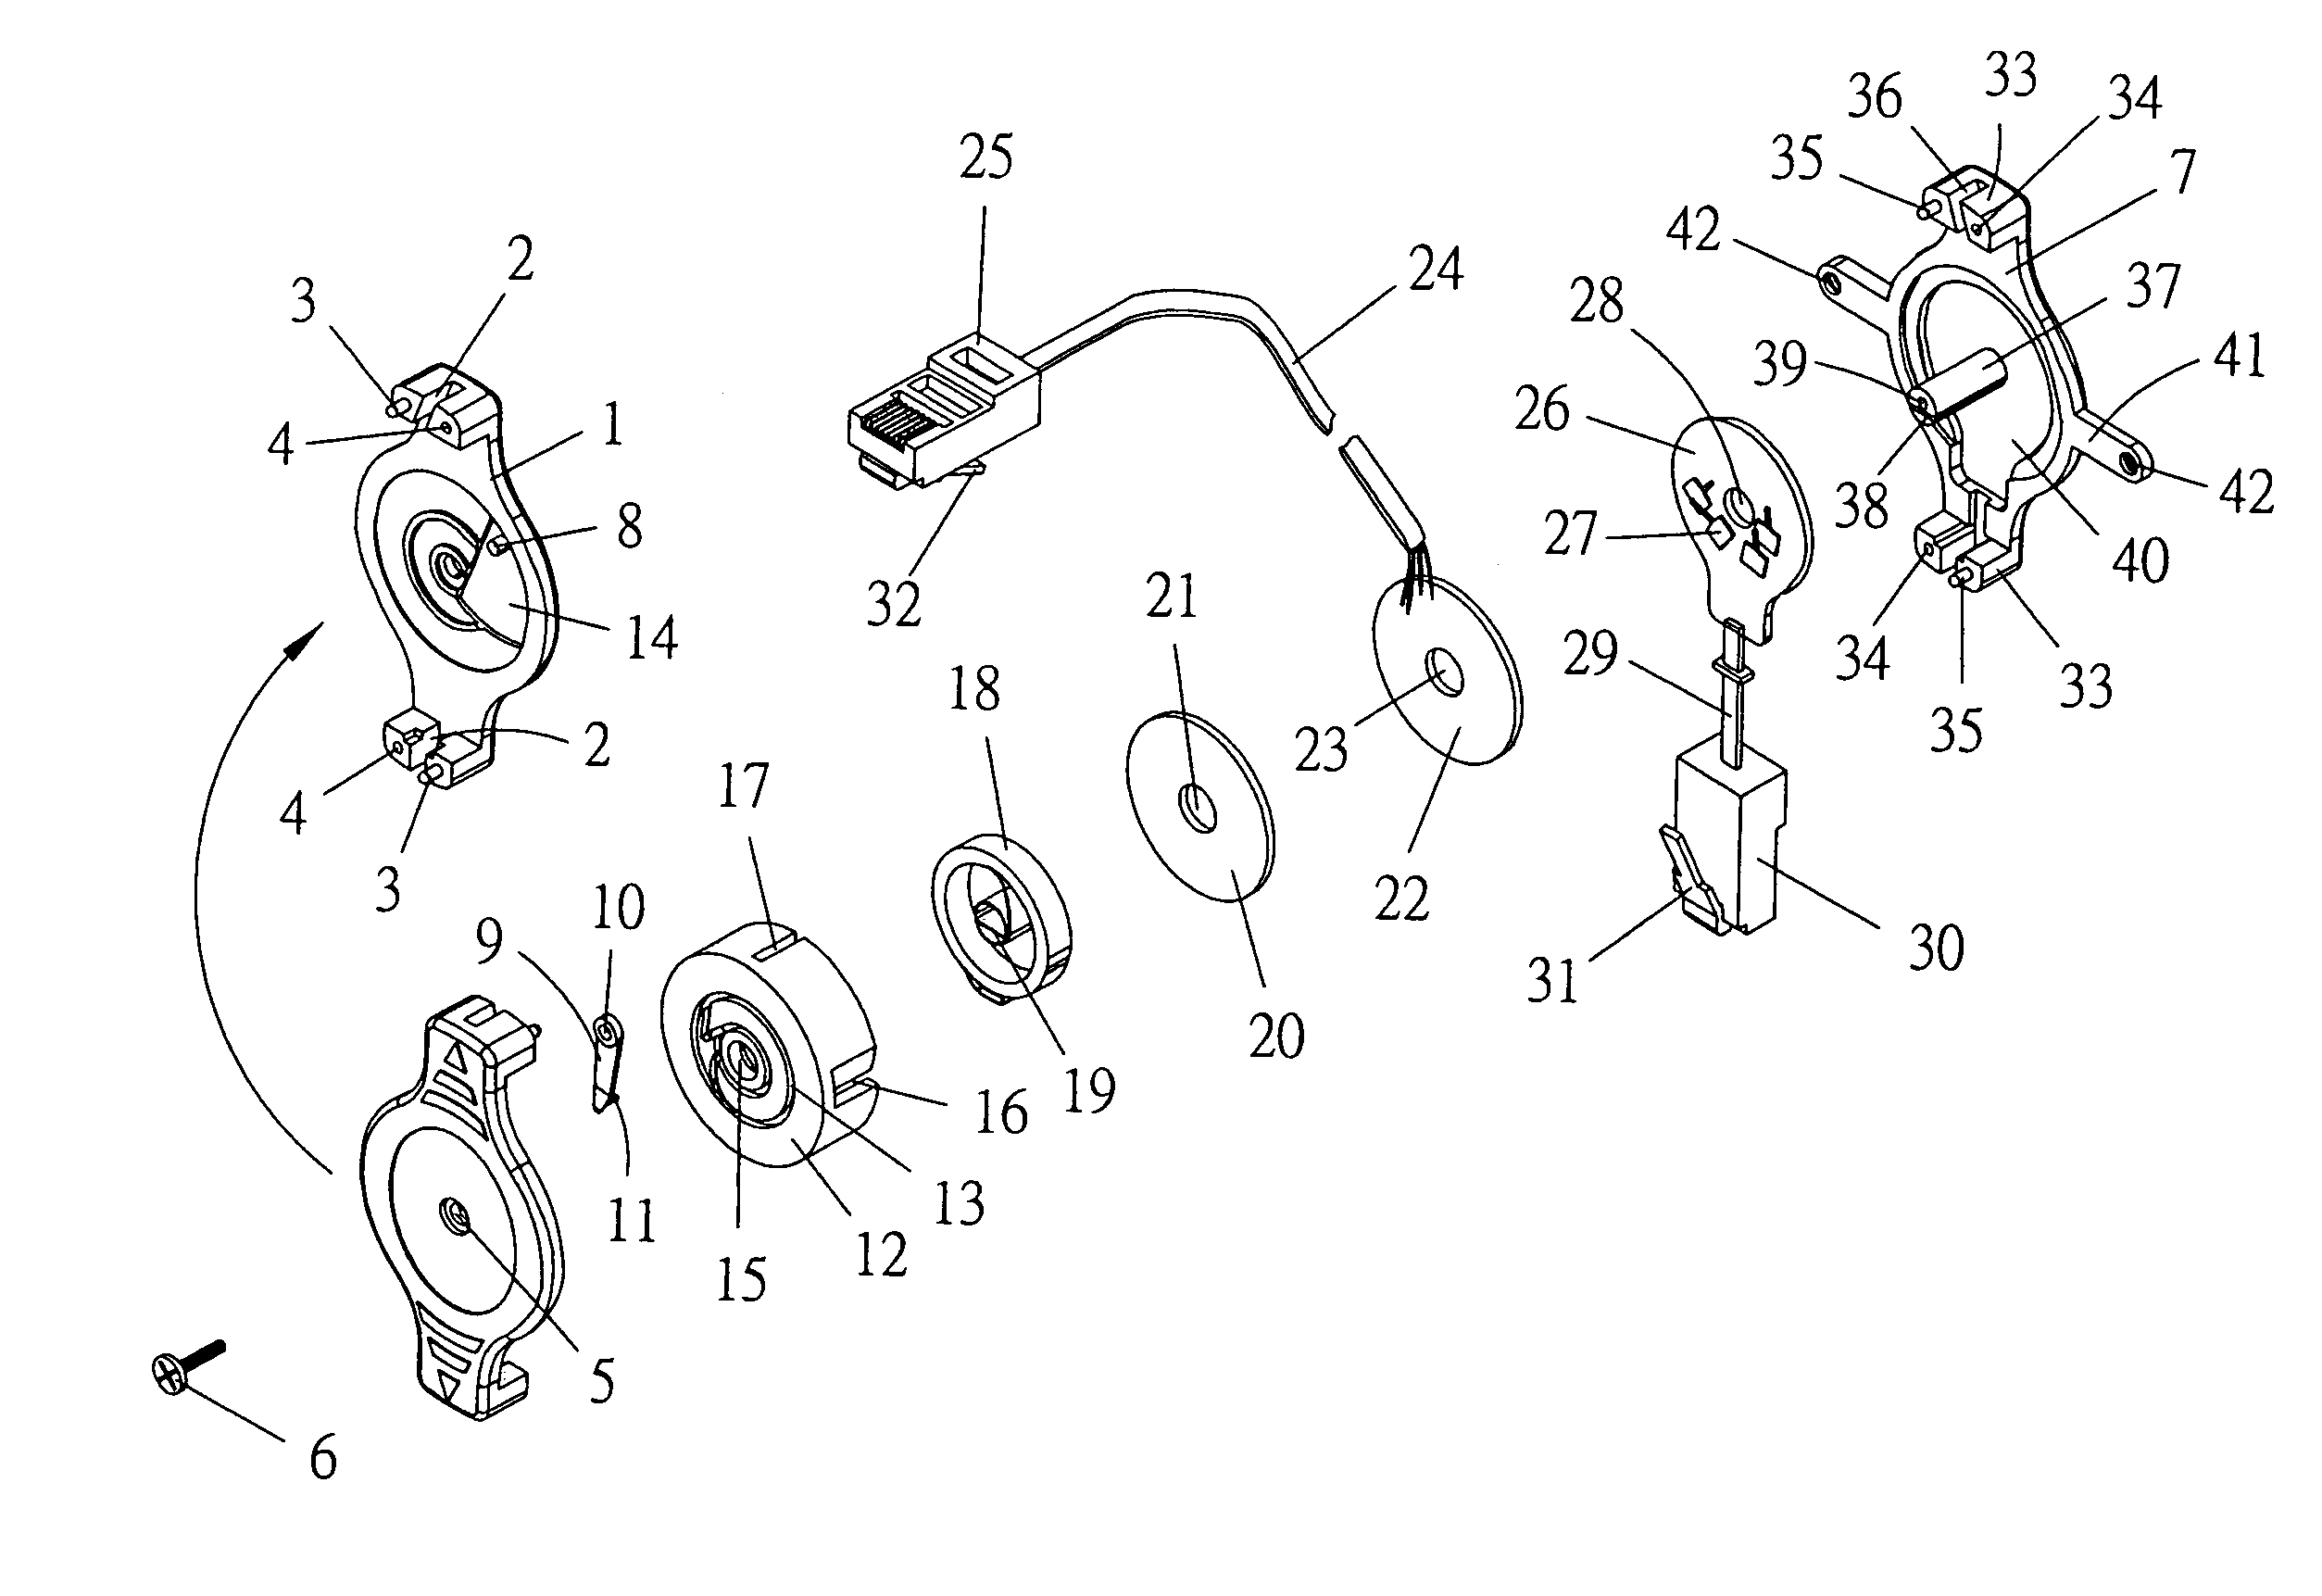 Wire winding device for receiving network wires or telephone wires